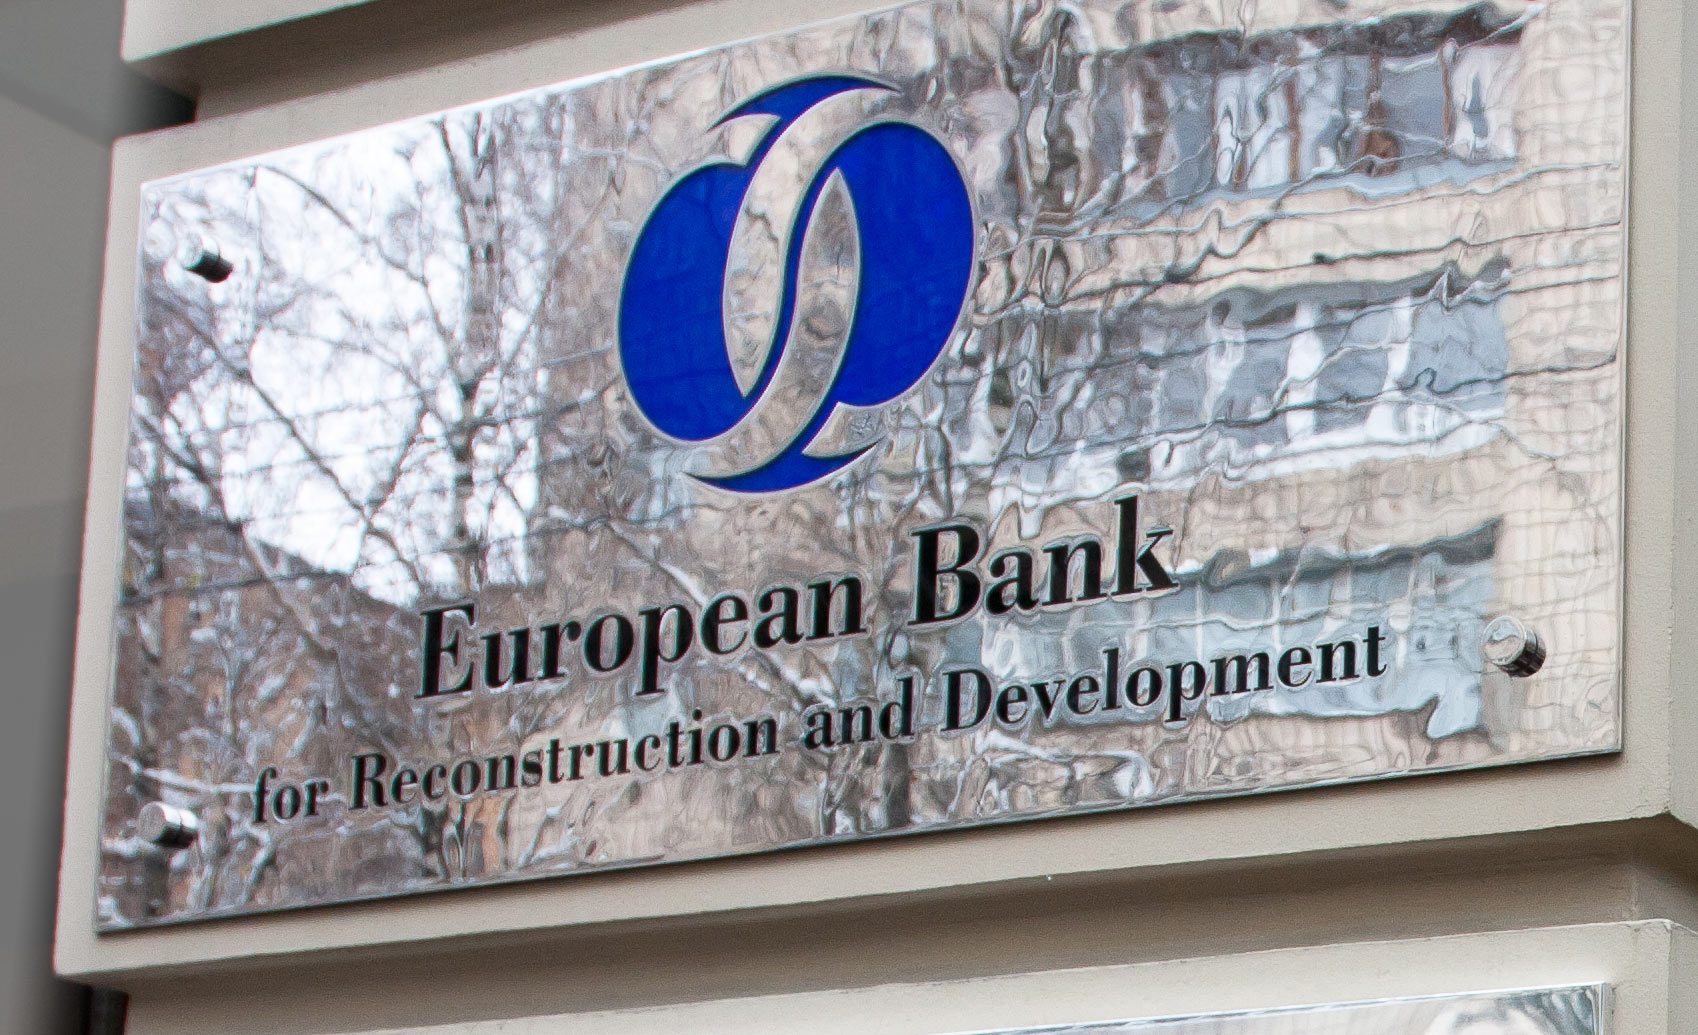 The European Bank for Reconstruction and Development (EBRD)